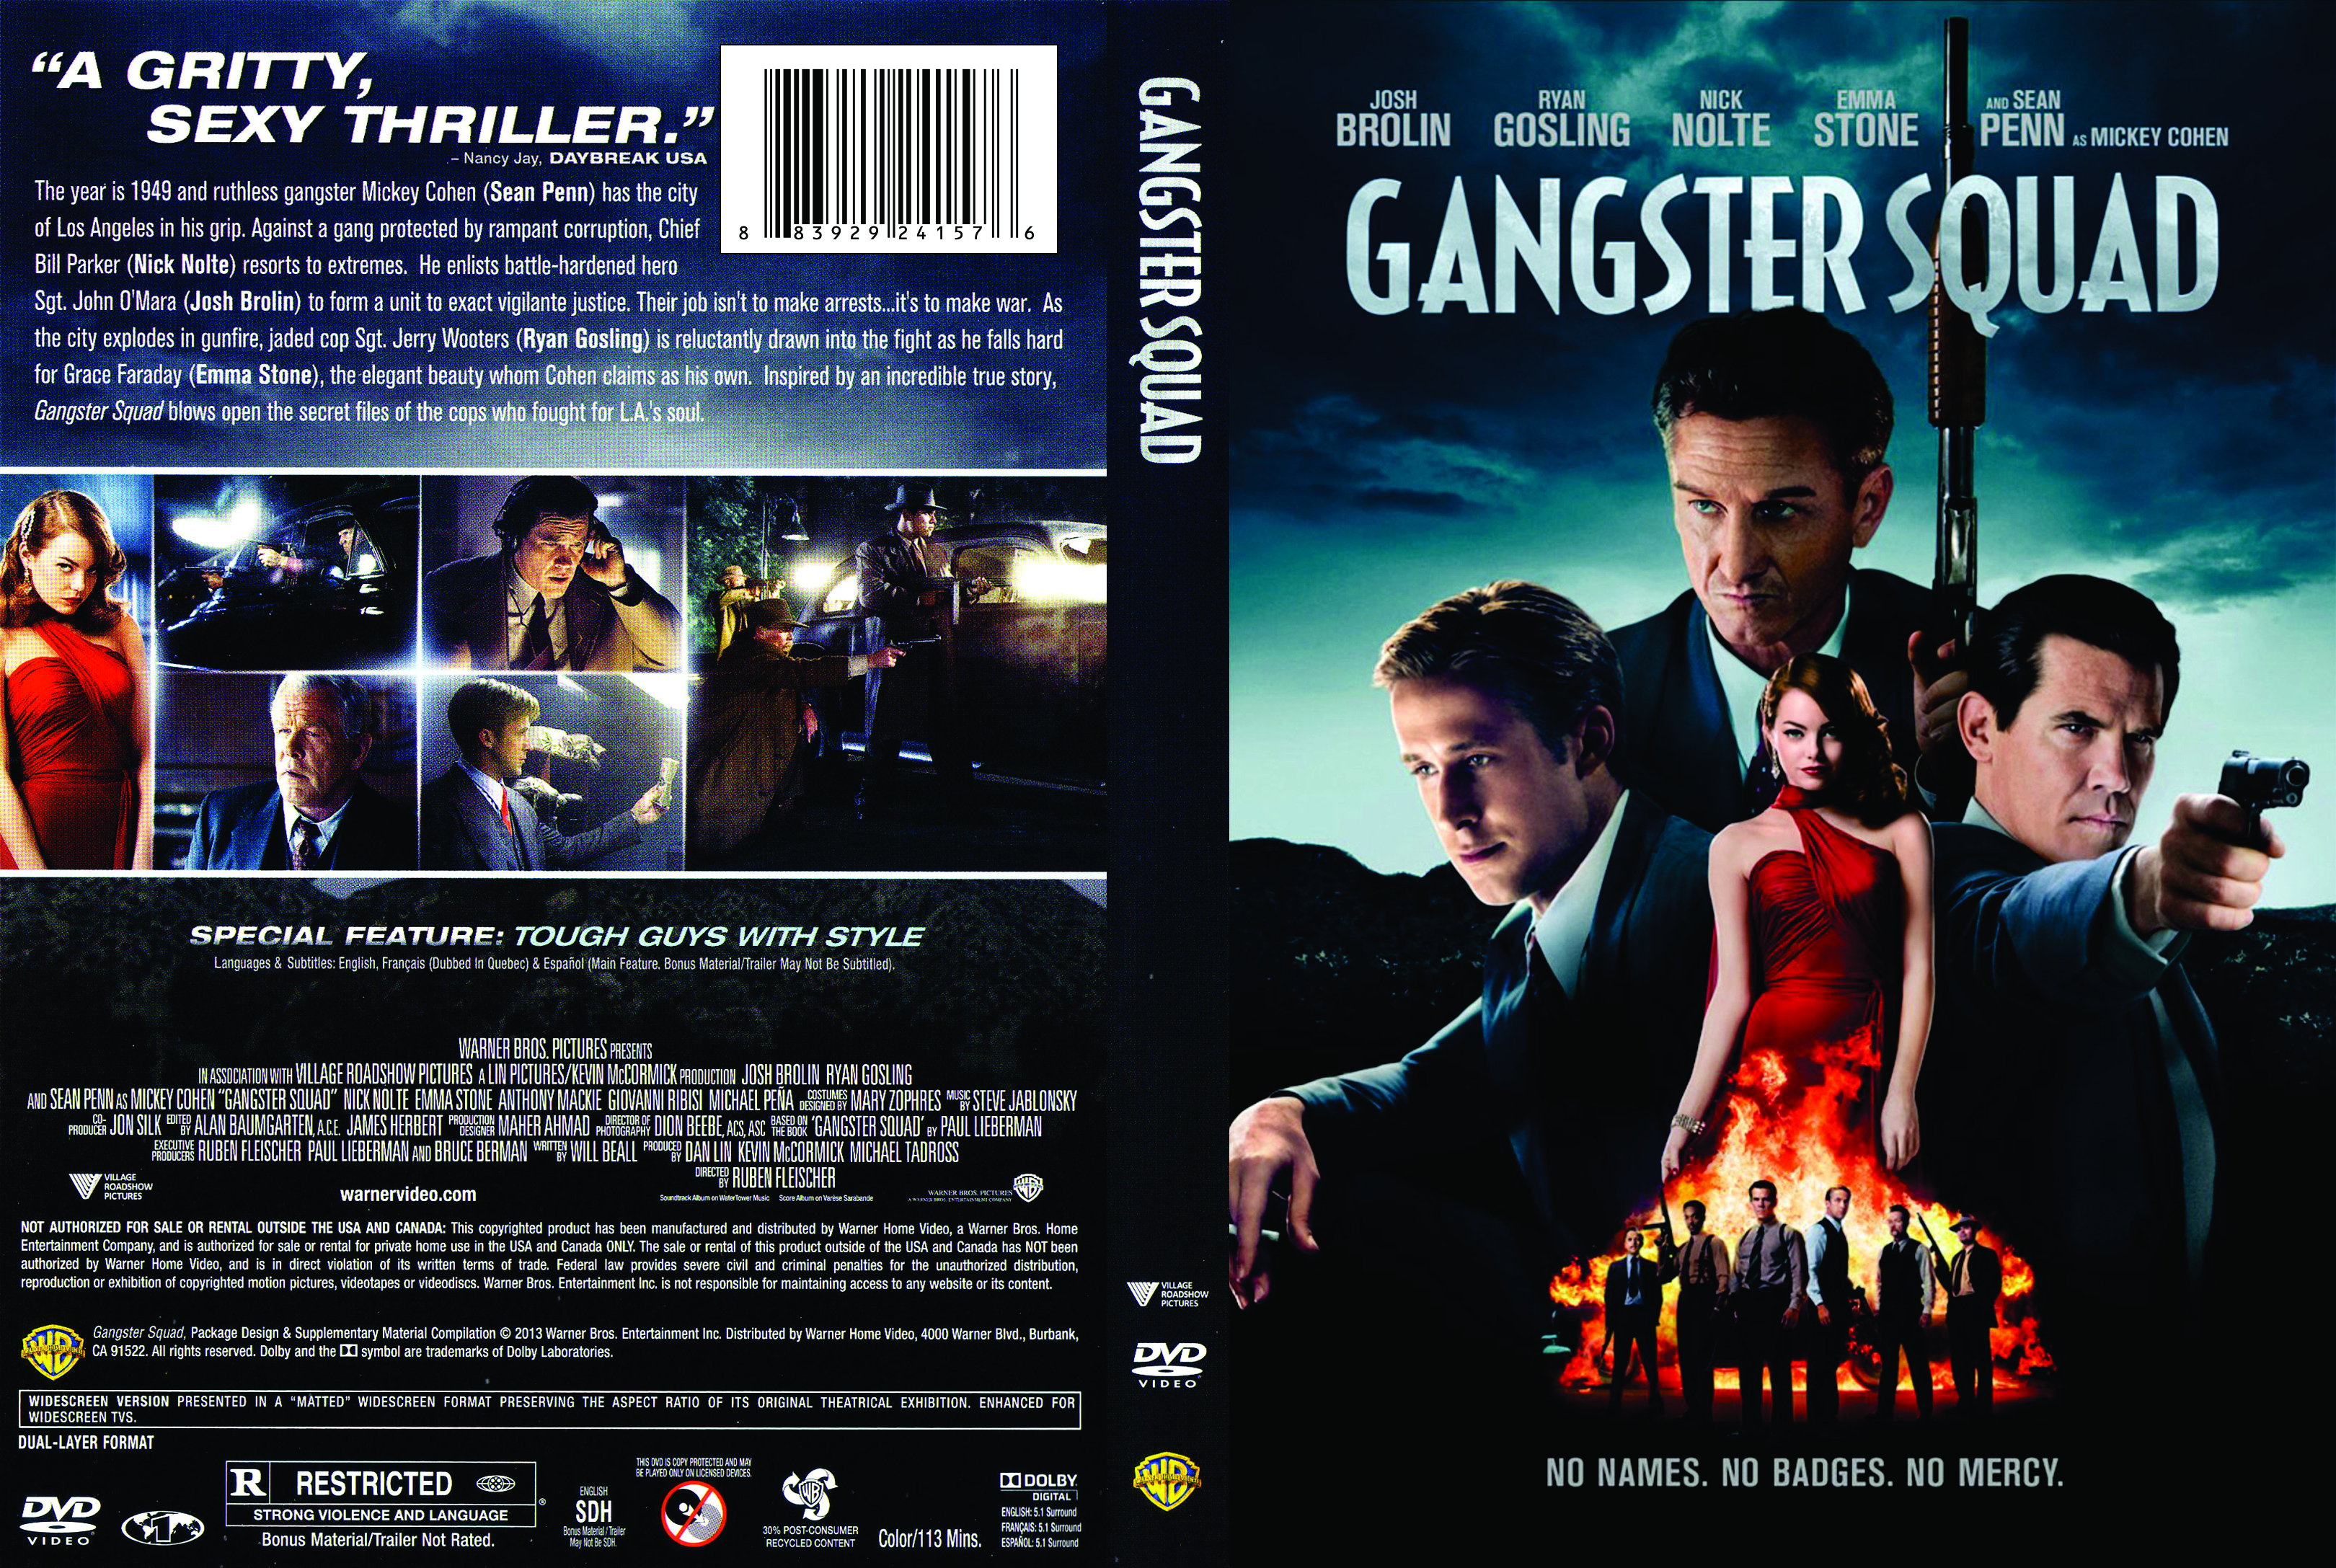 Jaquette DVD Gangster Squad Zone 1